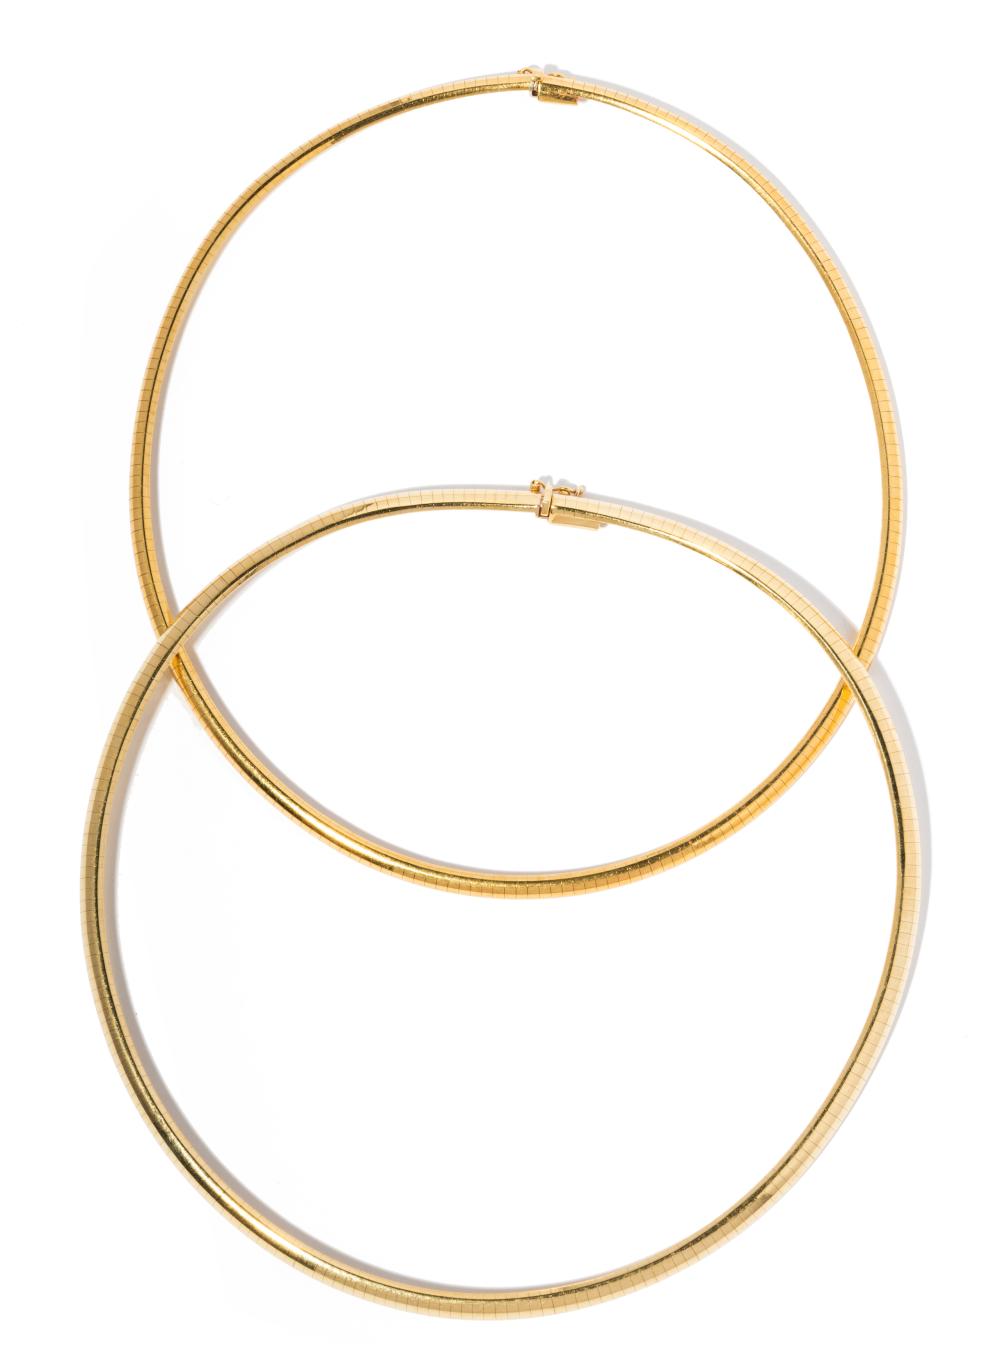 TWO YELLOW GOLD OMEGA LINK NECKLACESTwo